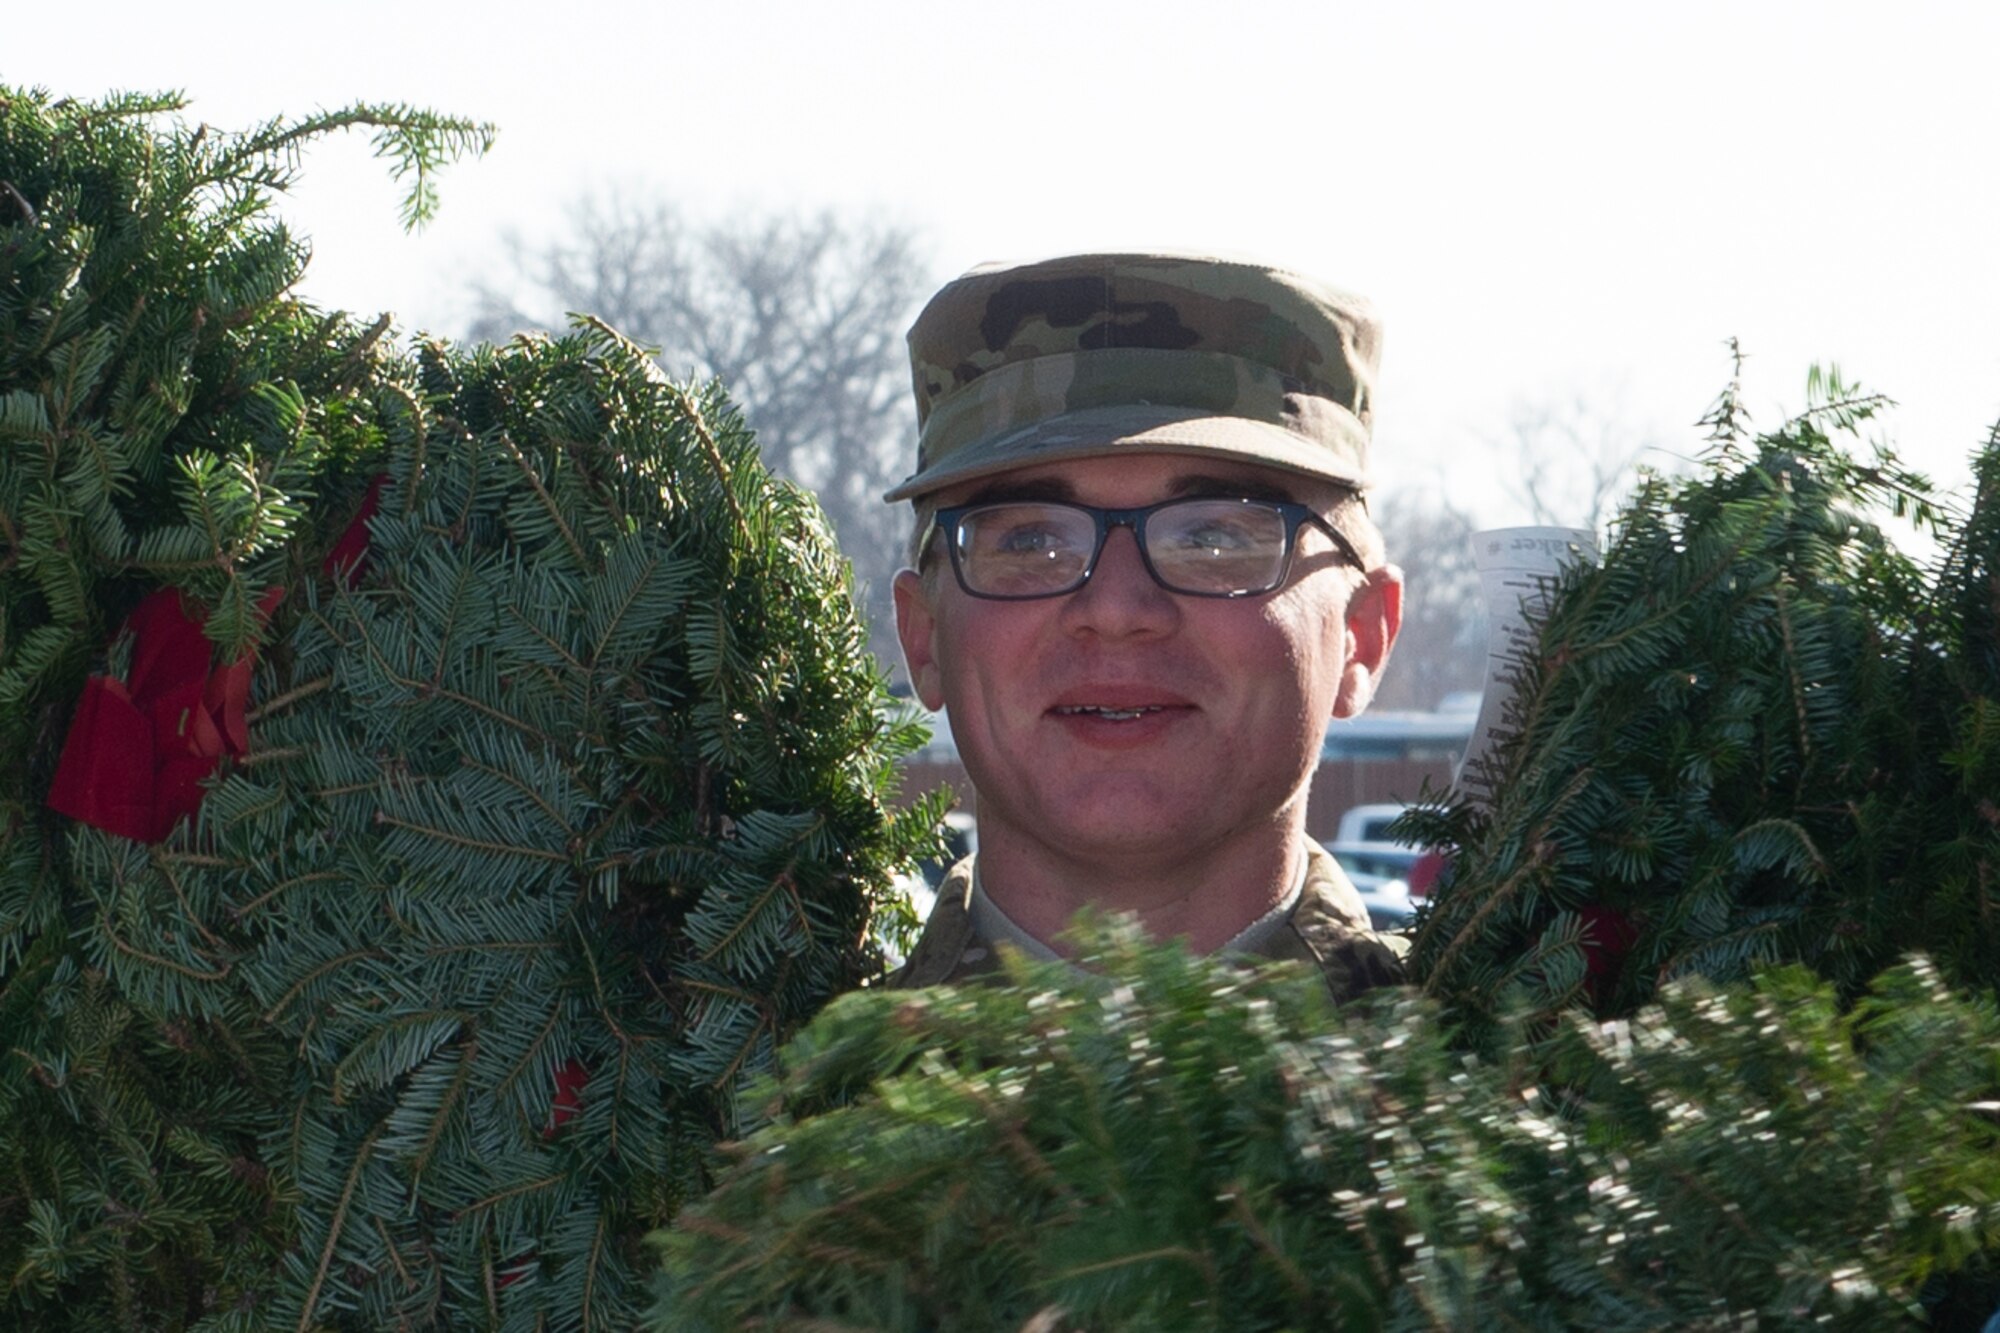 A photo of A volunteer carrying wreaths at at Offutt Air Force Base.